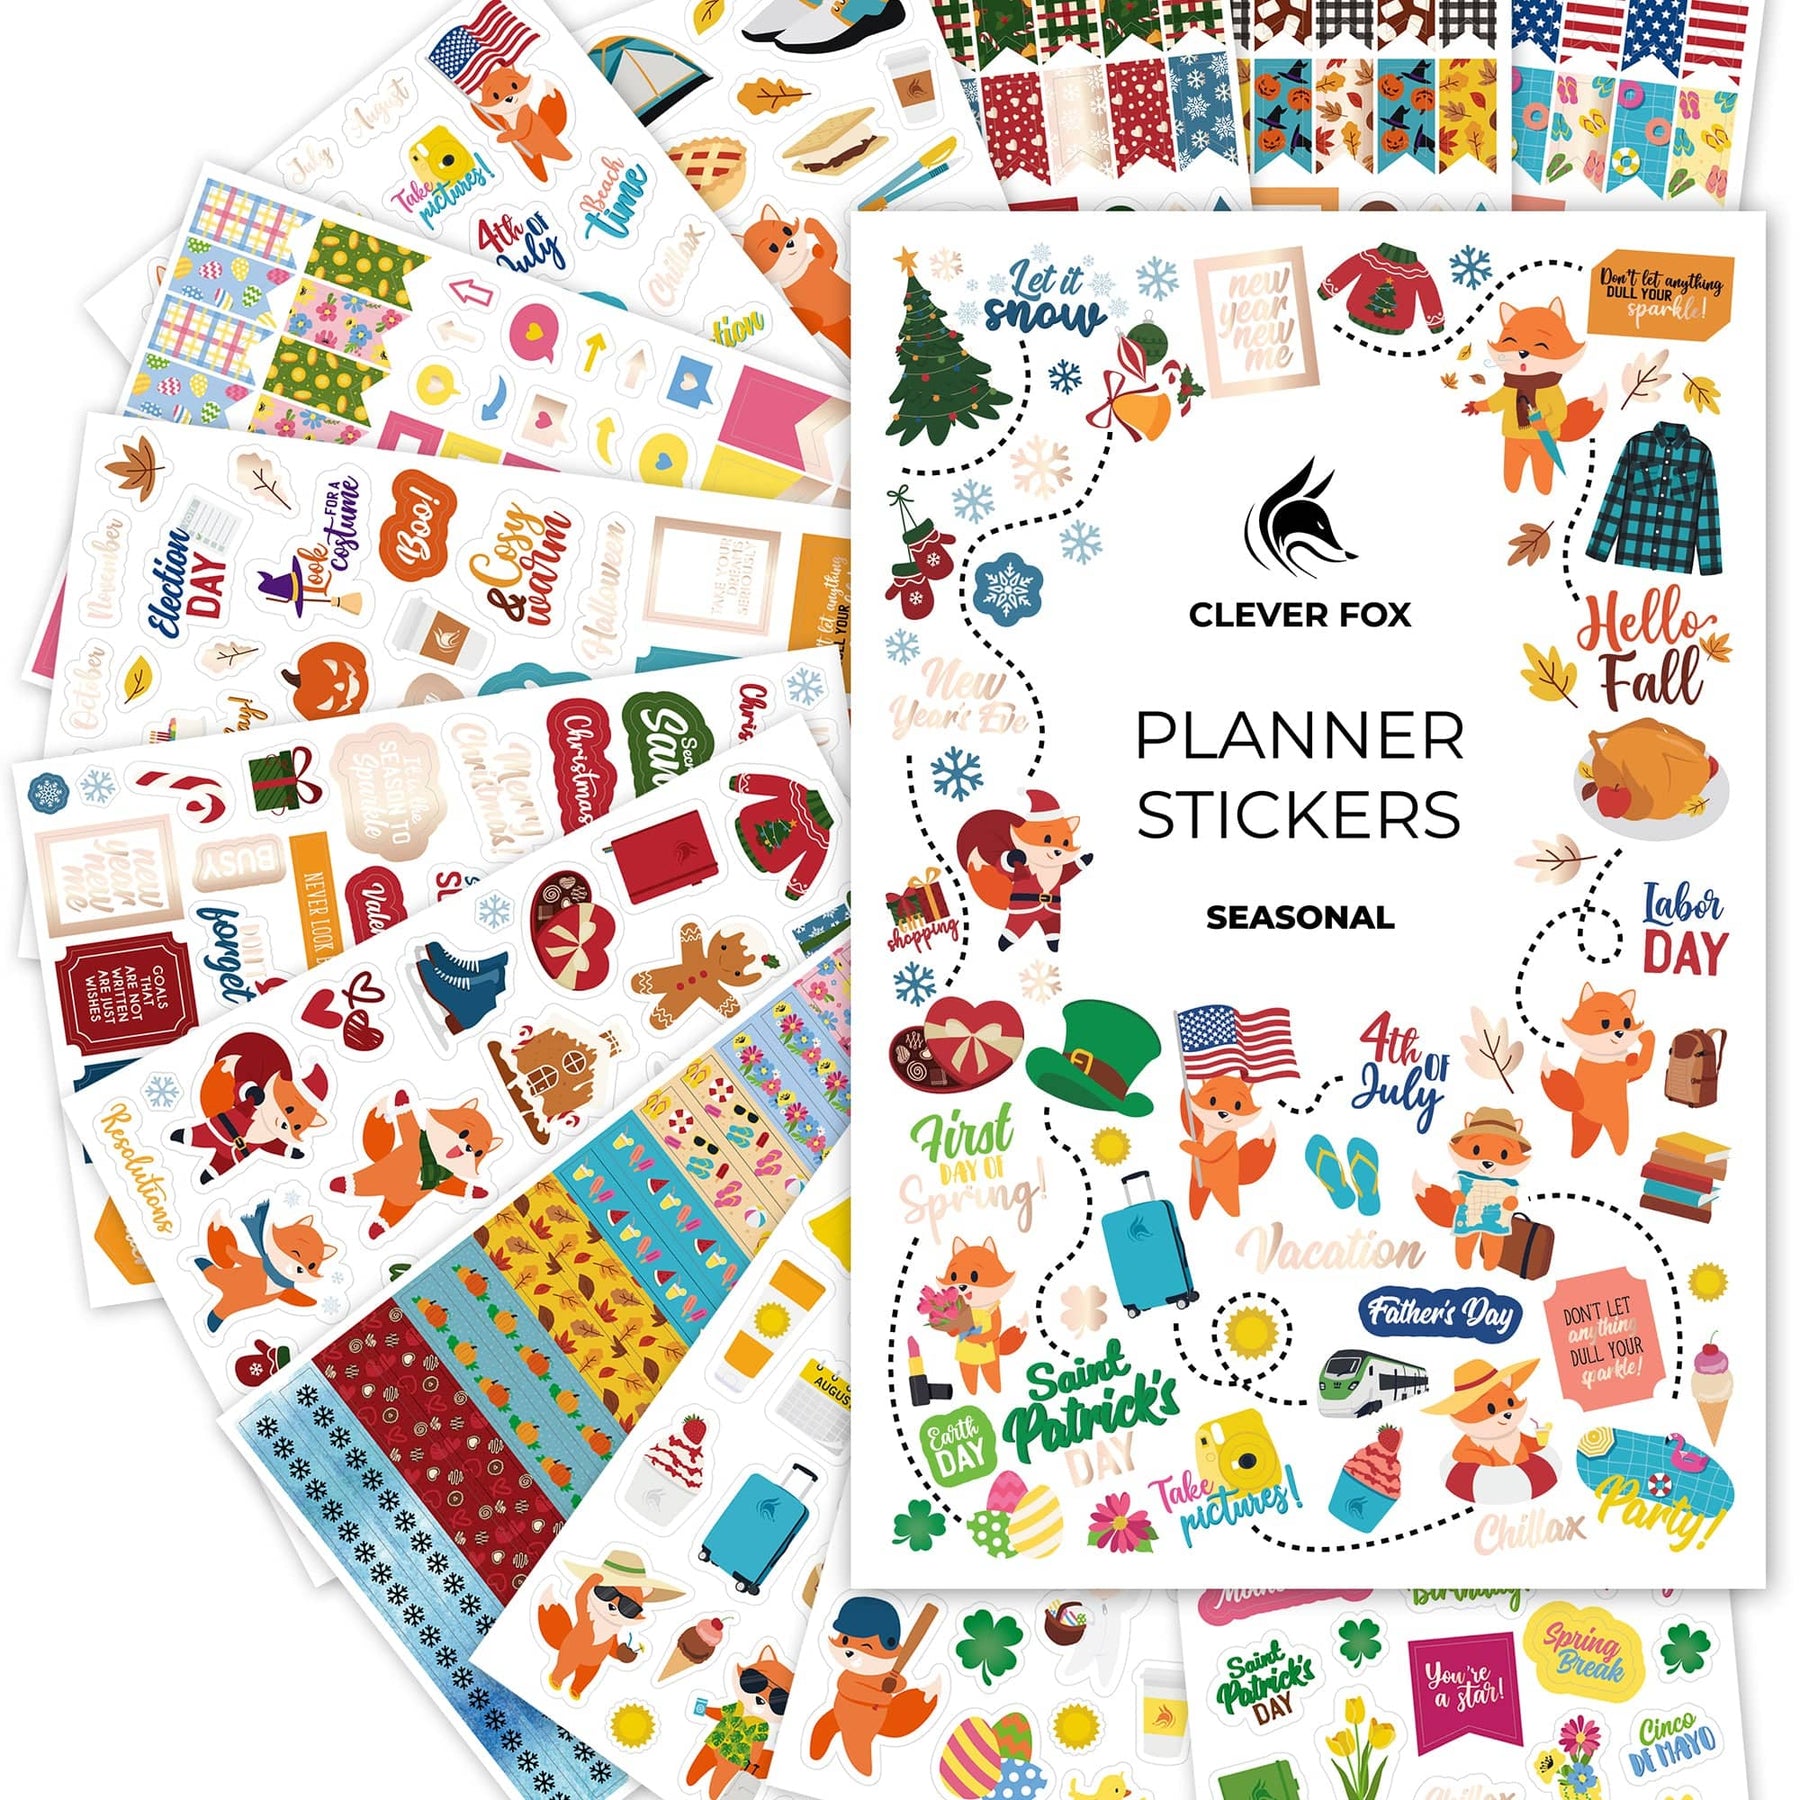 24 Sheets 1700+ Planner Holiday Seasonal Stickers Planner Daily Sticker  Pack Cute Stickers Calendar Stickers Scrapbooking Supplies for Decorating